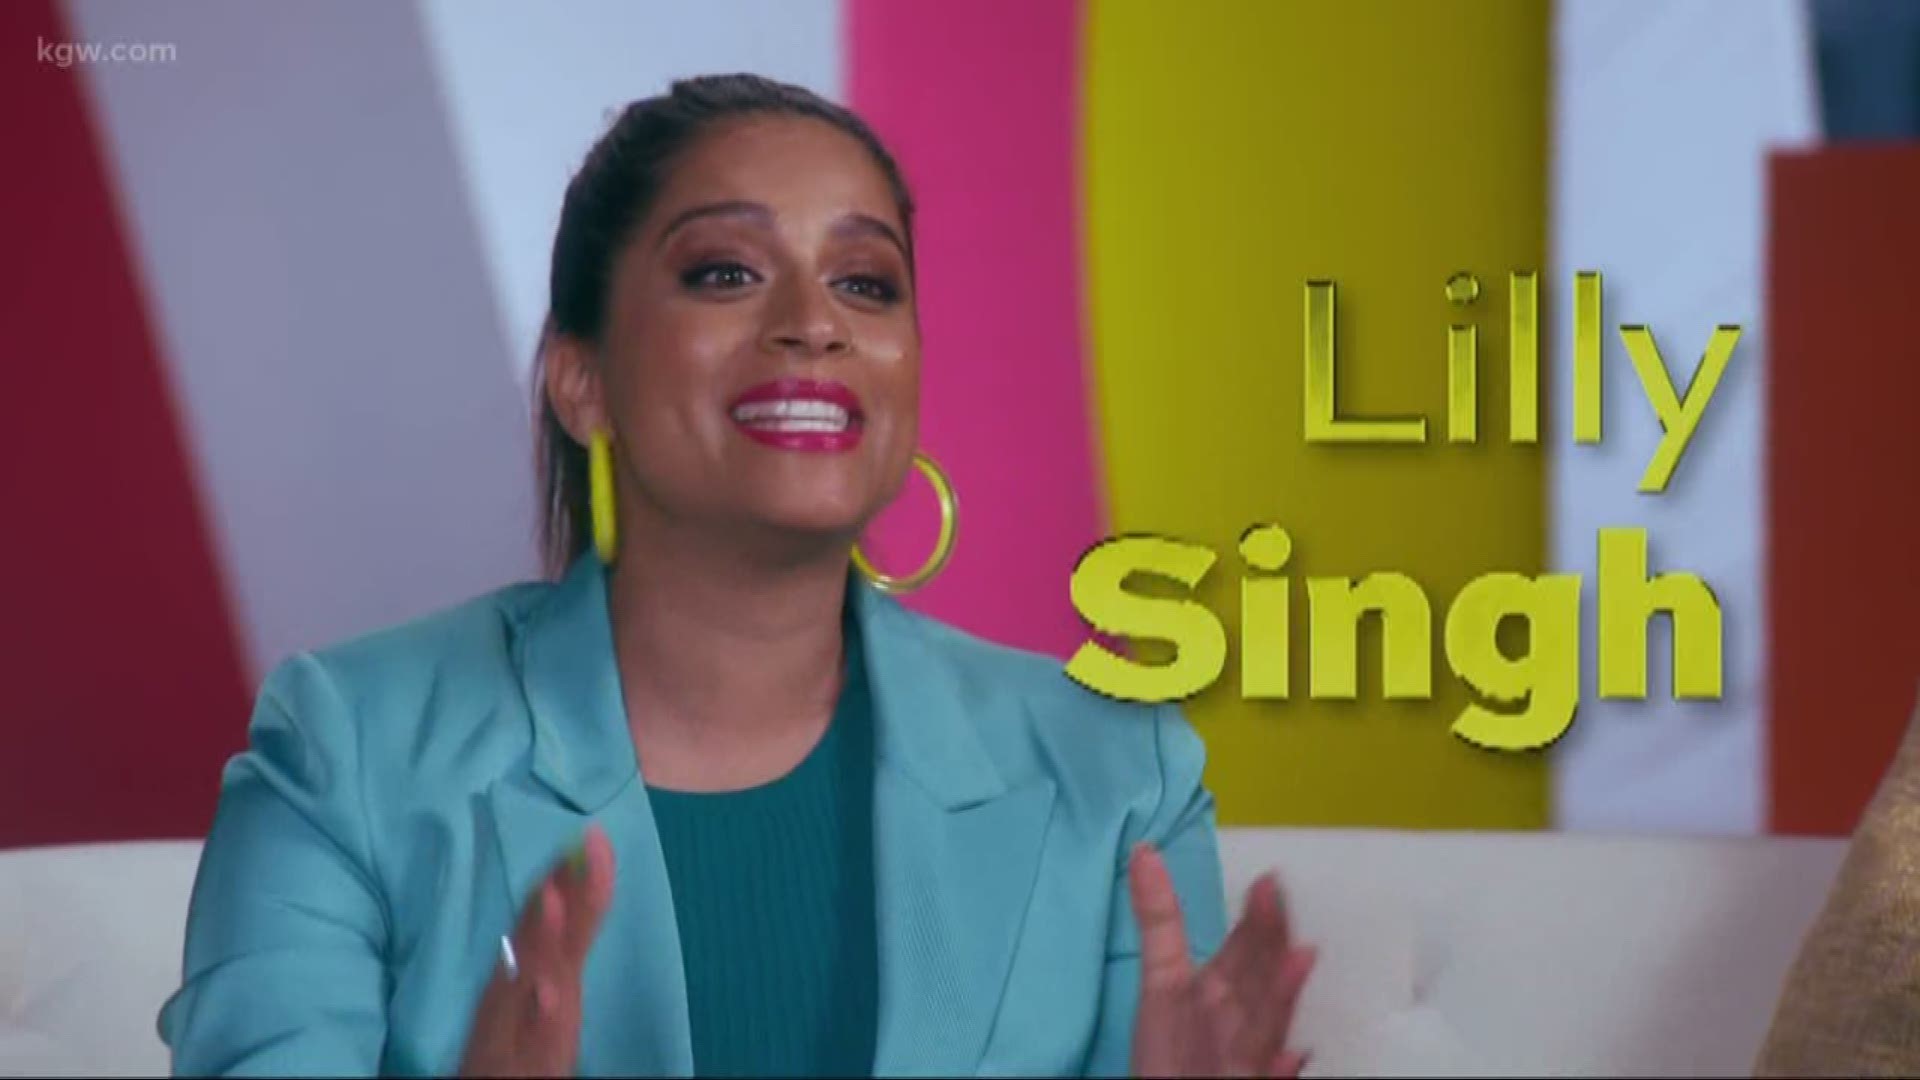 Lilly Singh is making waves in the late-night tv scene and we're excited to see her show.
#TonightwithCassidy